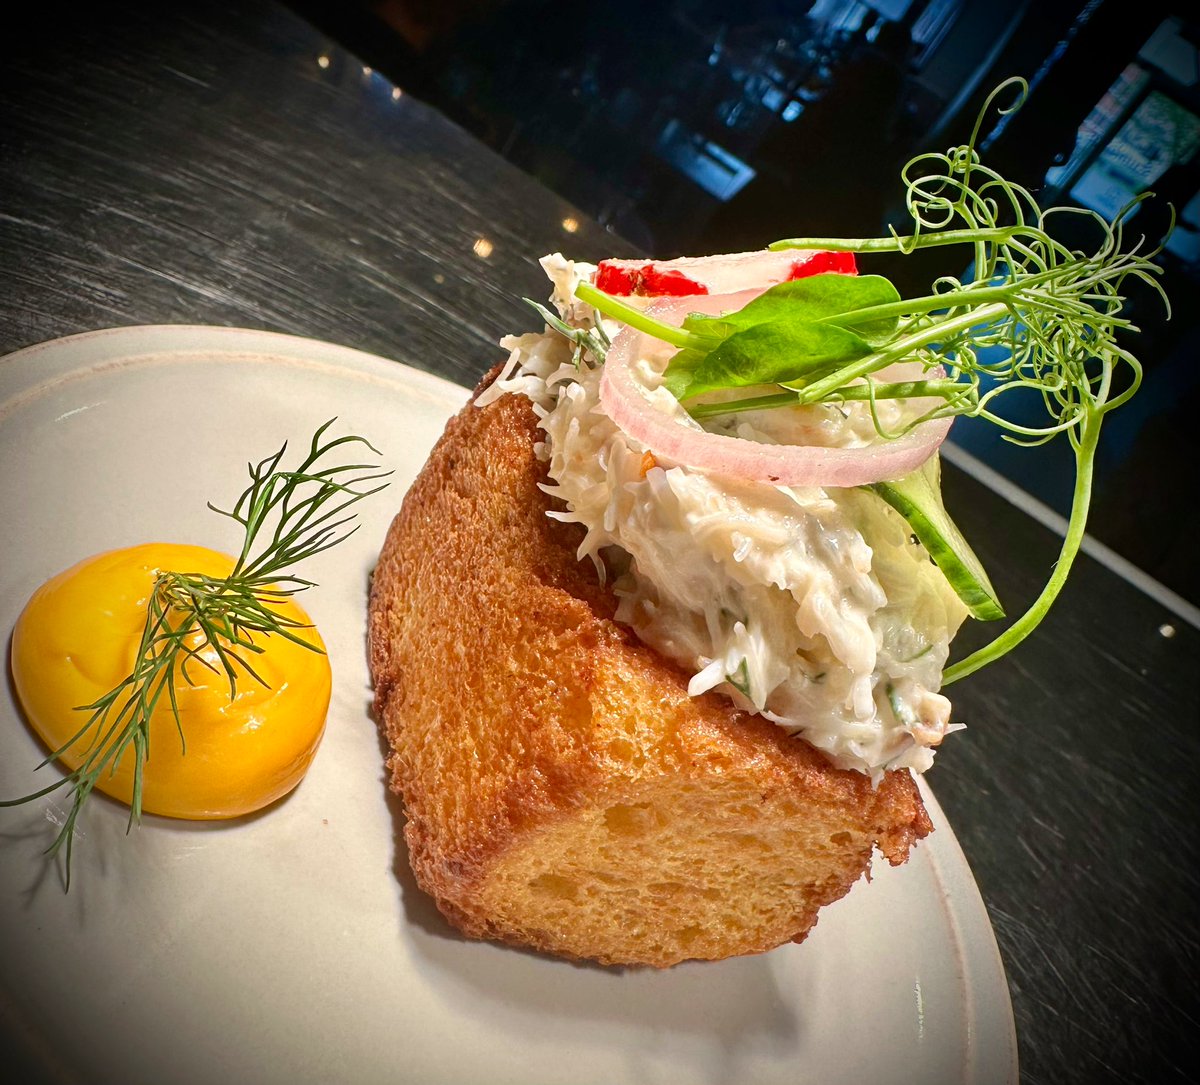 “Crab on toast” fresh kilkeel crab on toasted butter brioche, pickles, roast crab aioli, dill #proper #fresh #supportlocal #smallplates